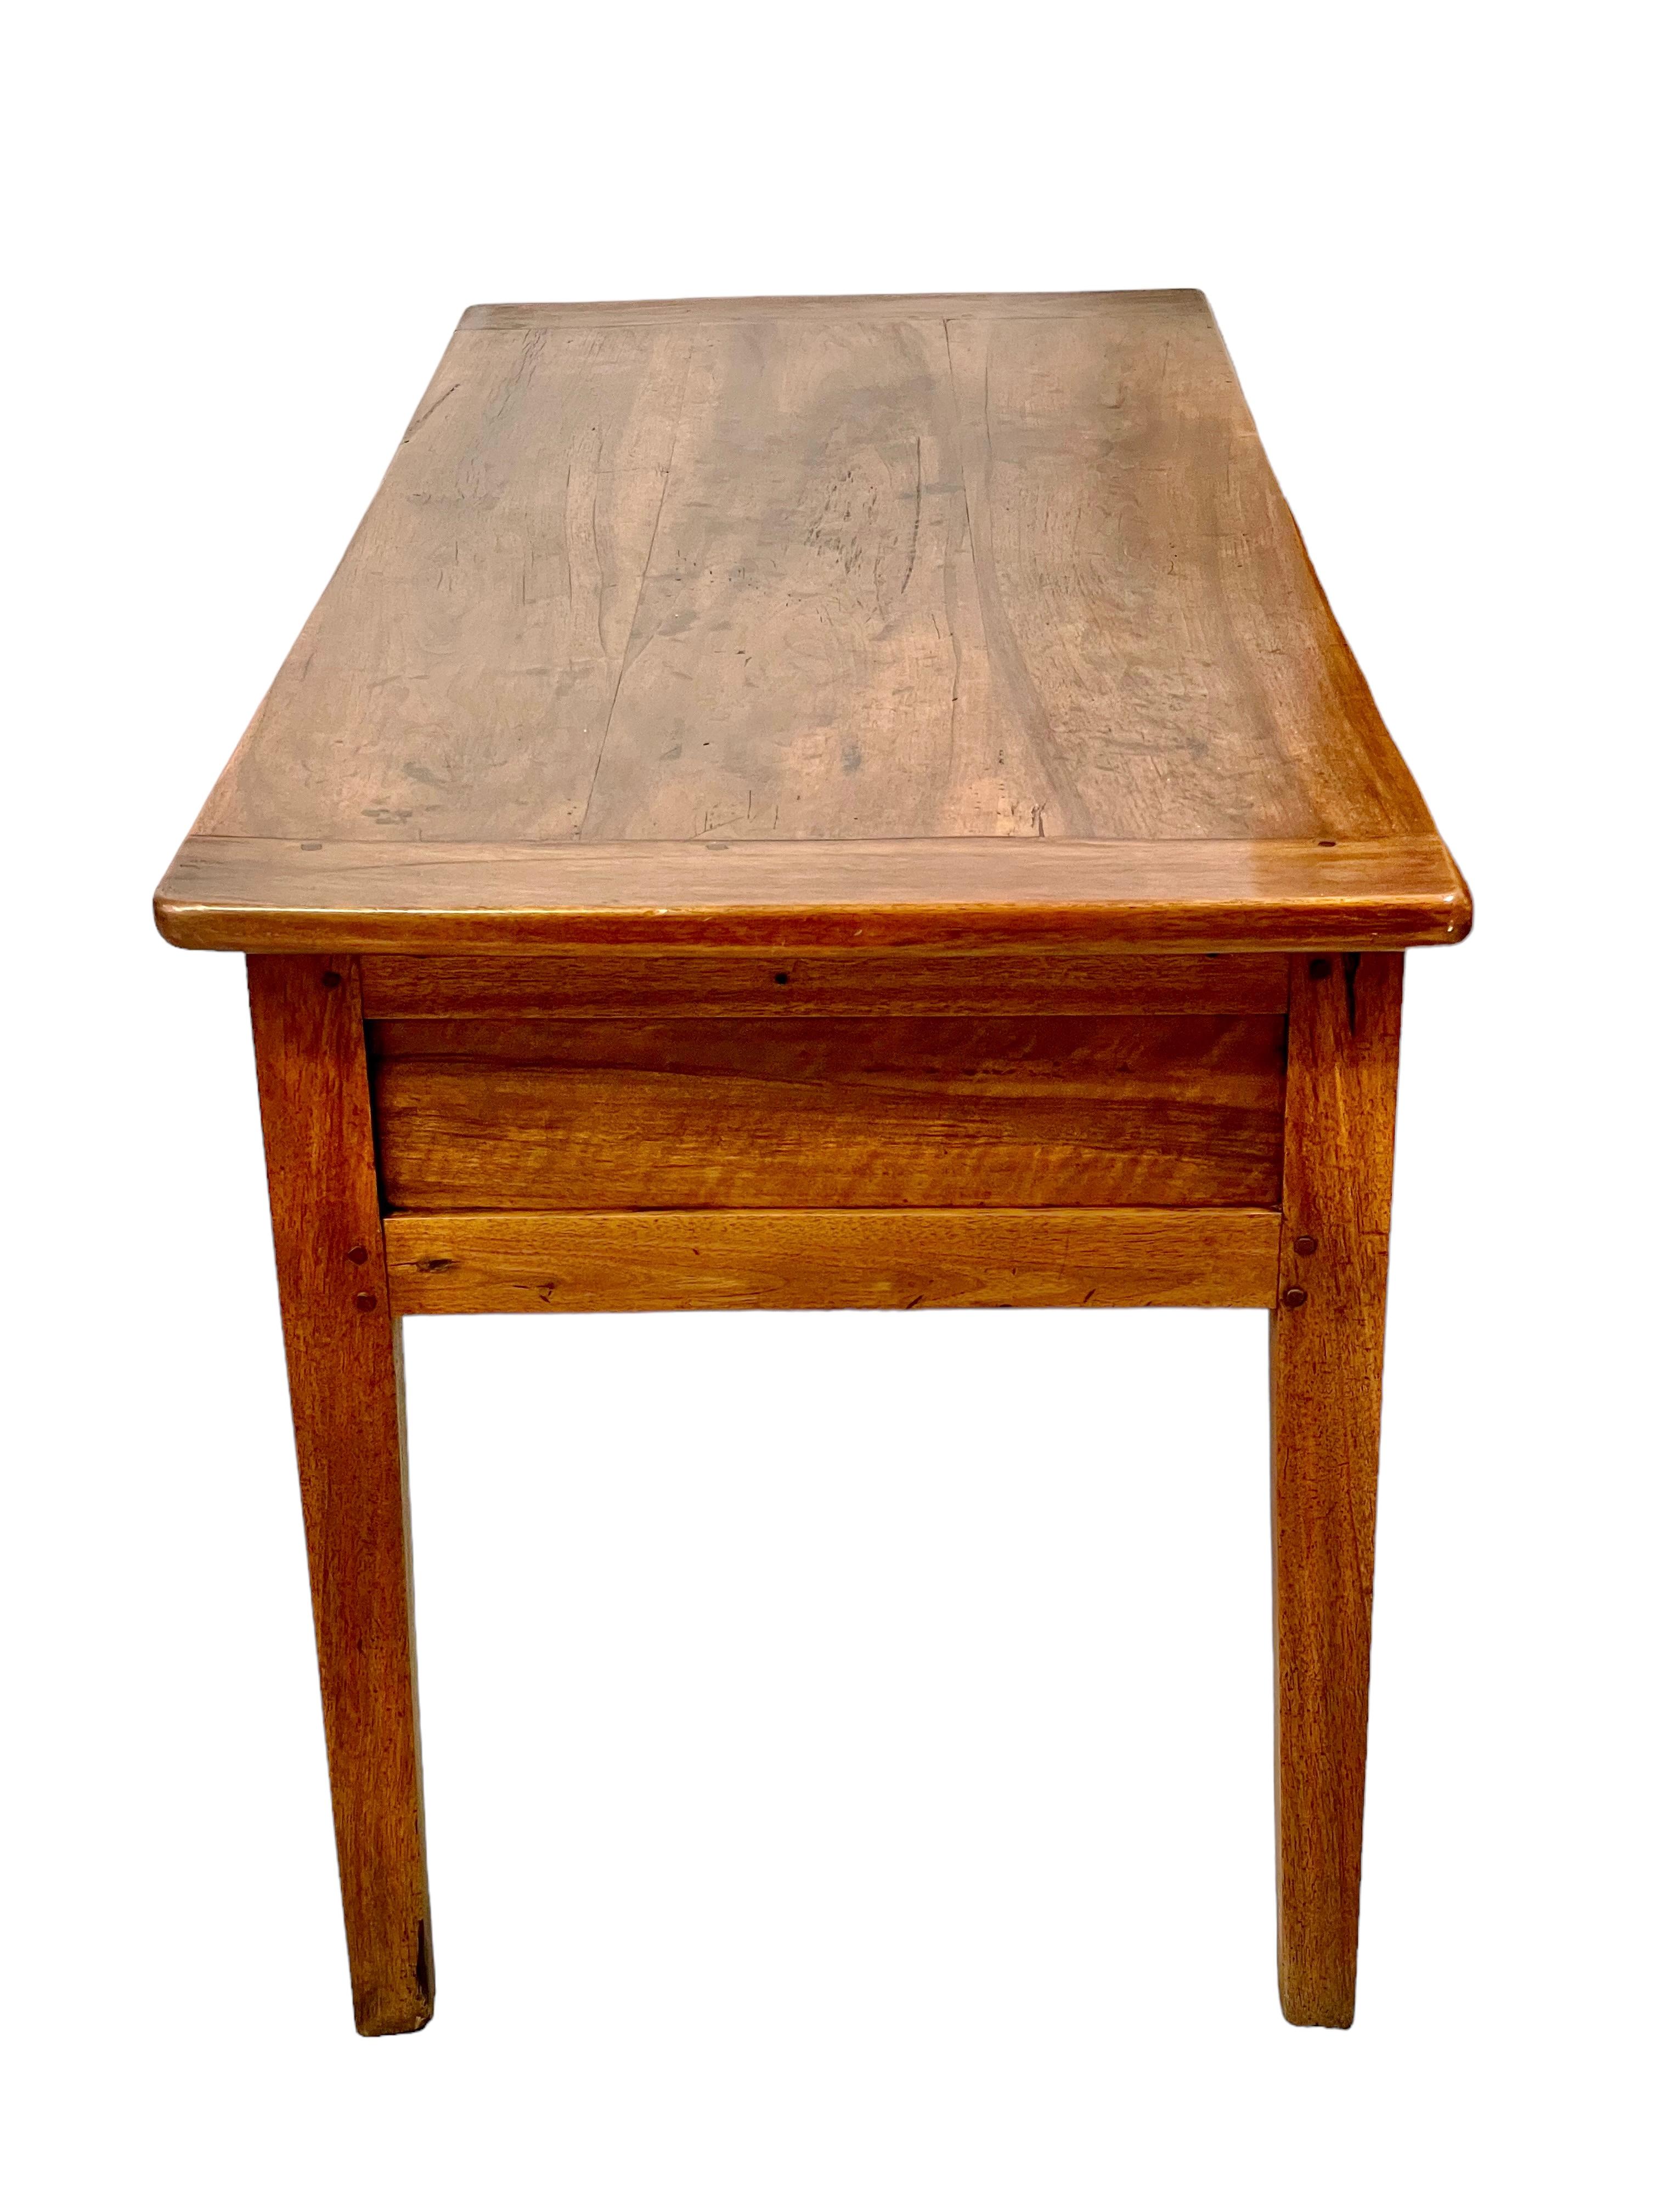 Rustic  19th Century French Pétrin or Kneading Table For Sale